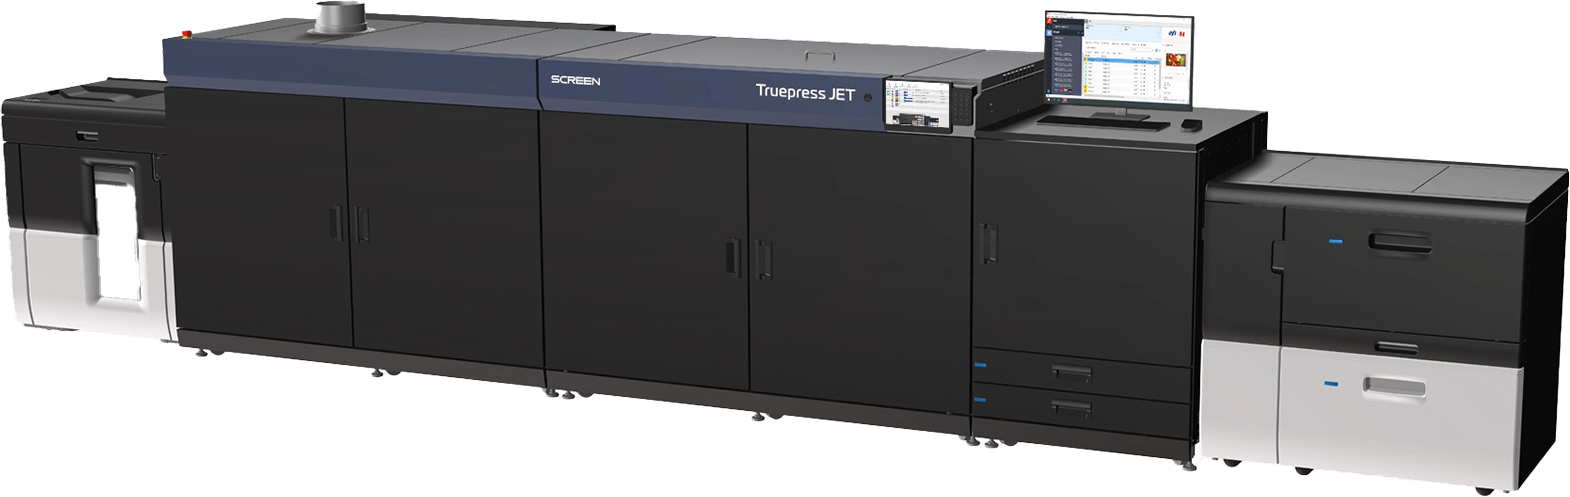 SCREEN and KYOCERA Document Solutions Introduce A3 Sheetfed Inkjet Prototype Printer; Product to Debut at PRINTING United Expo 2023